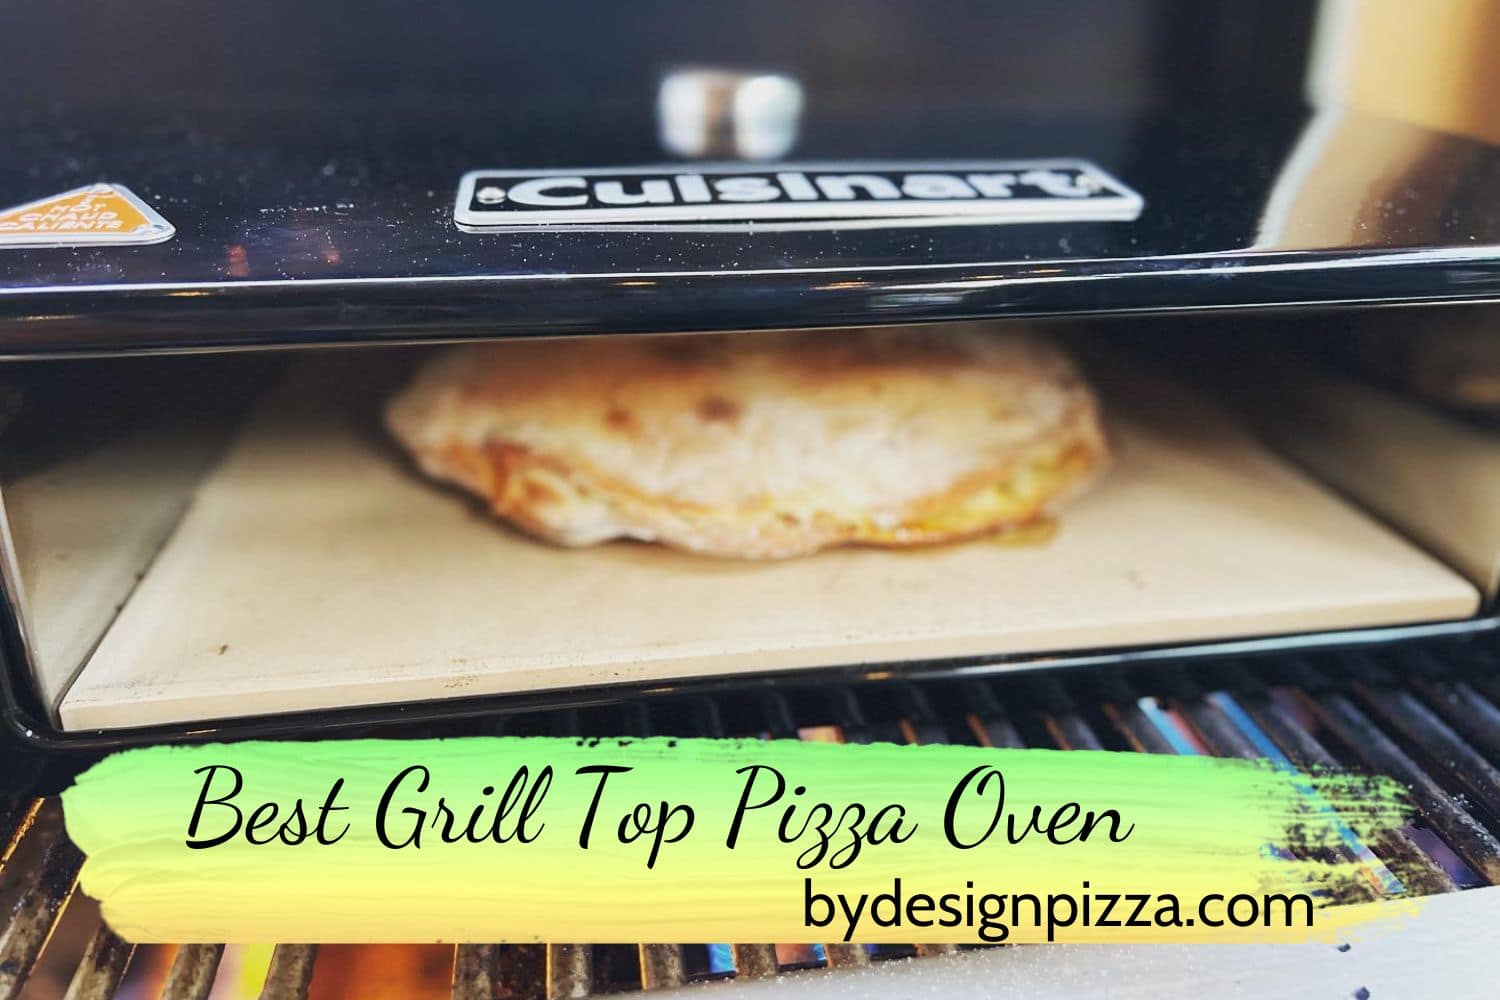 Best Grill Top Pizza Oven